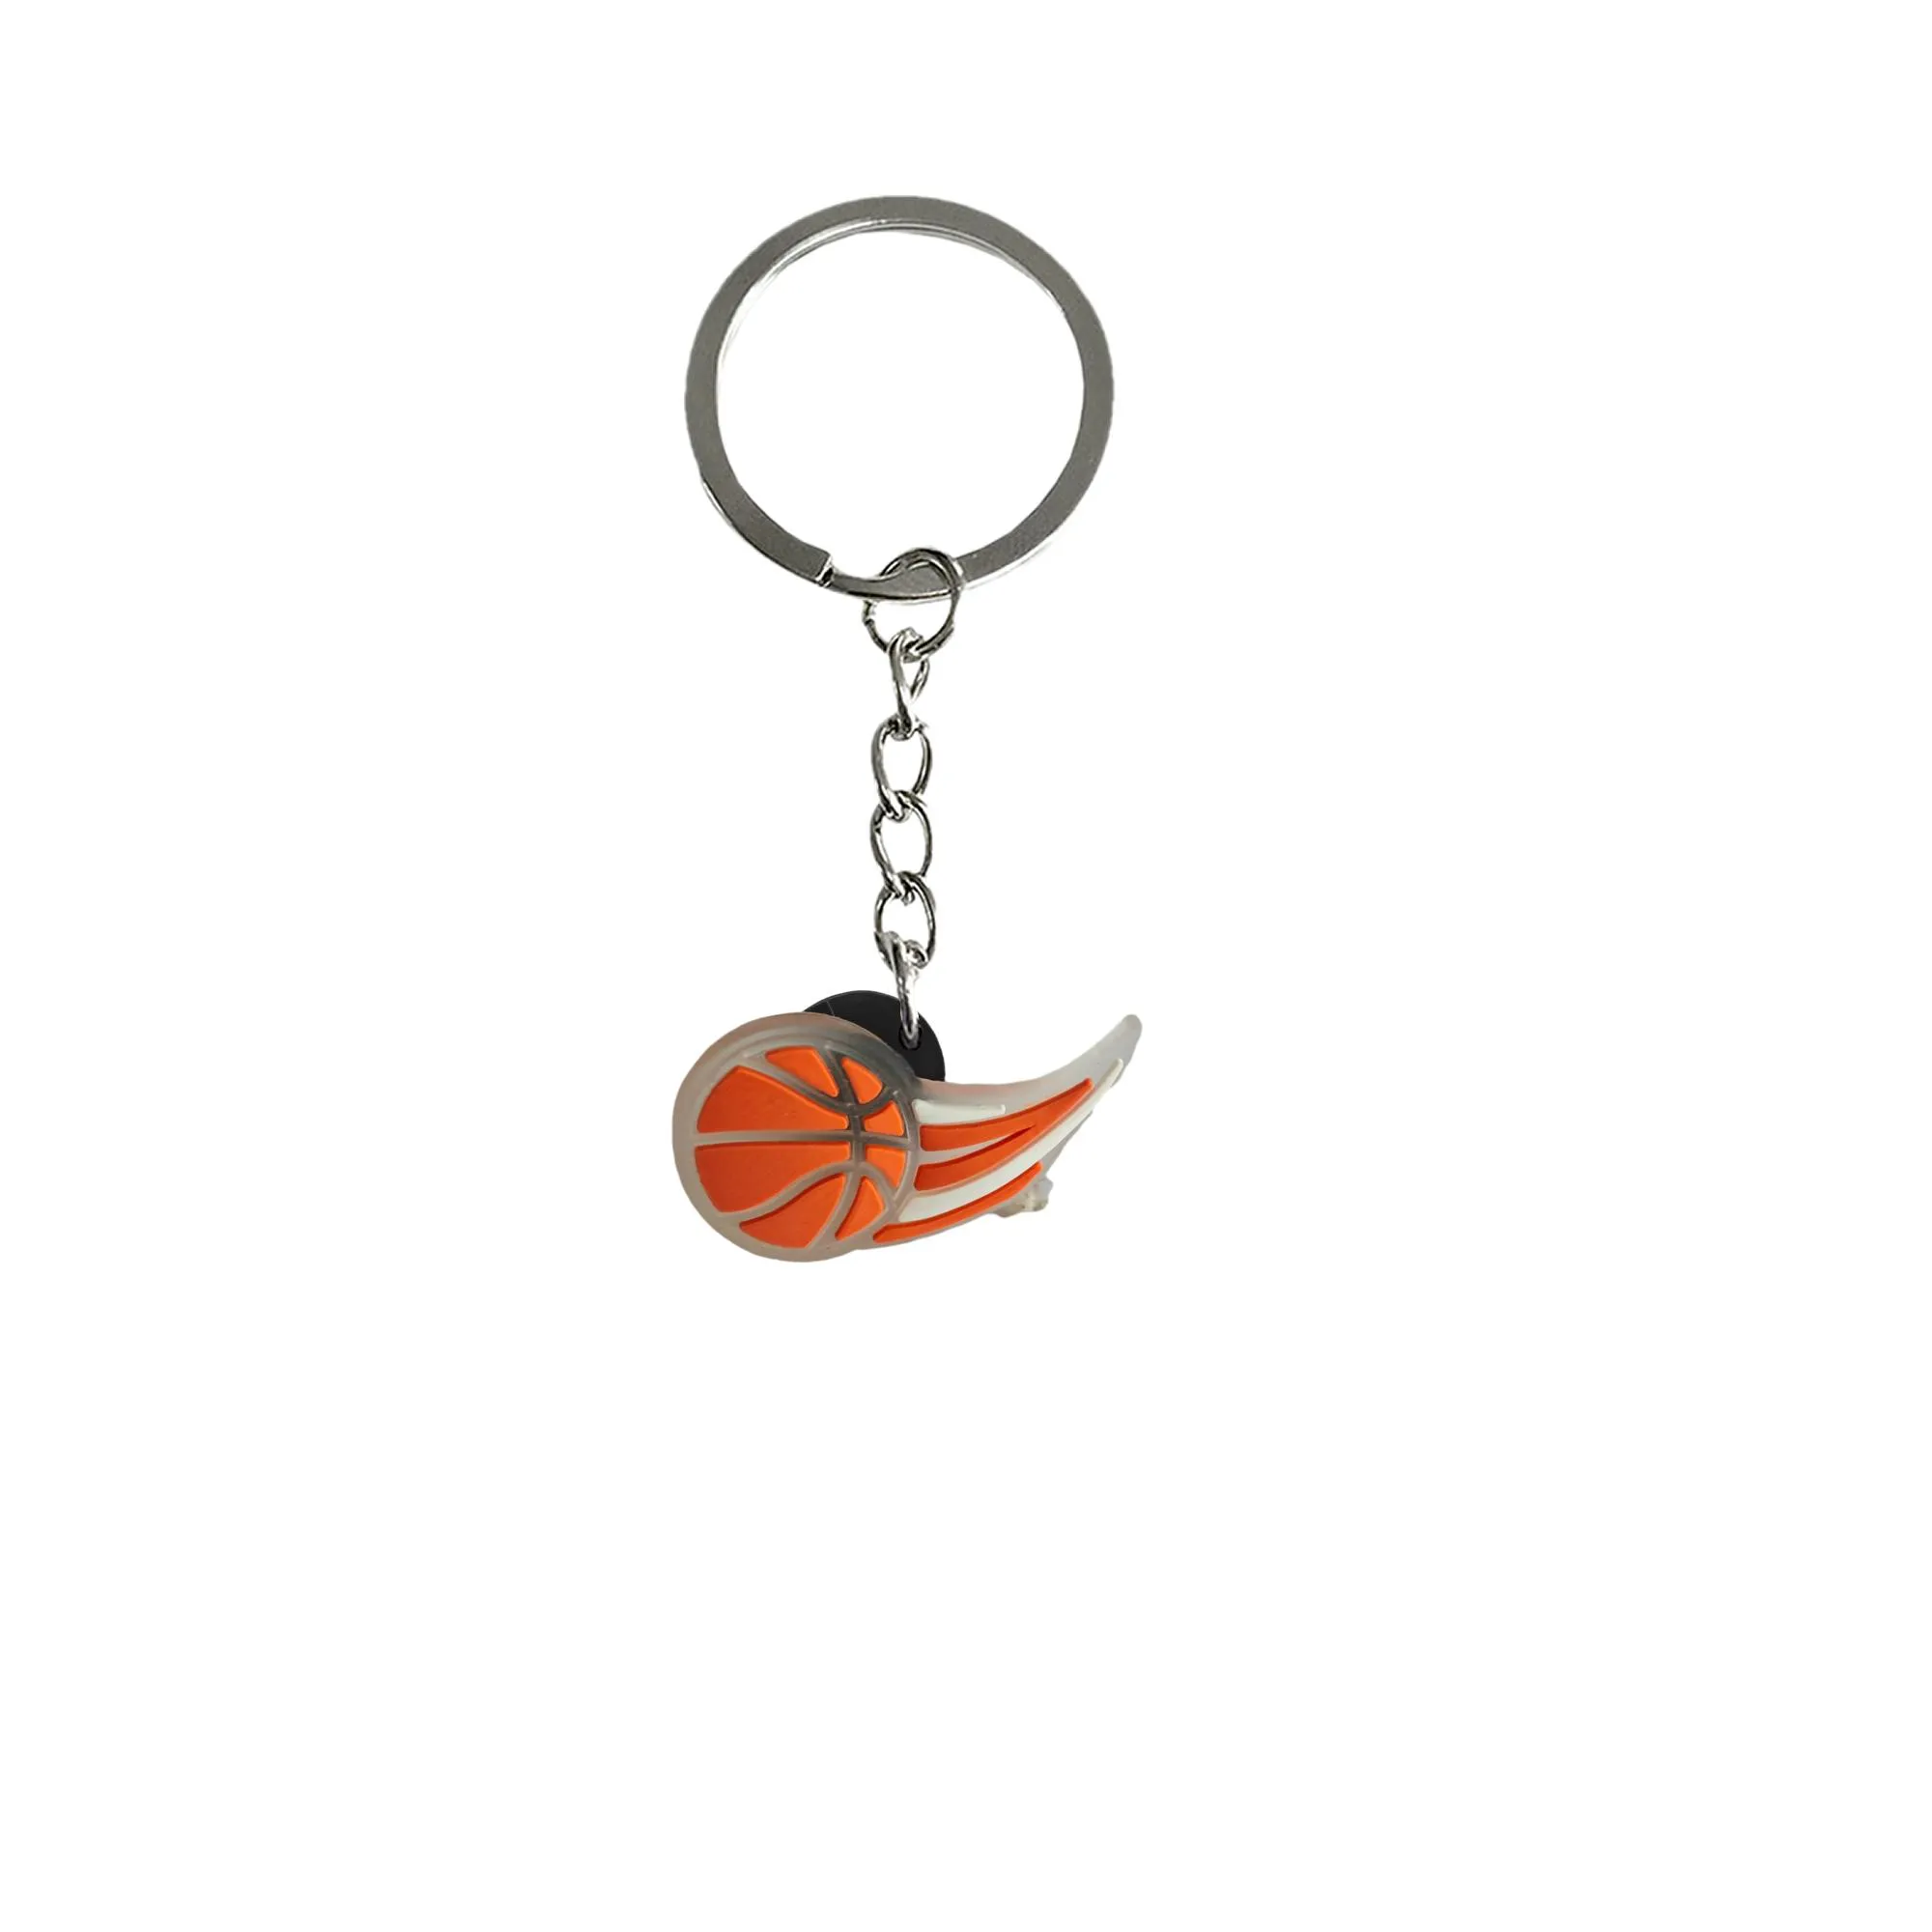 fluorescent basketball park 10 keychain cute silicone key chain for adult gift kids party favors keychains backpack keyring suitable schoolbag school day birthday supplies goodie bag stuffers